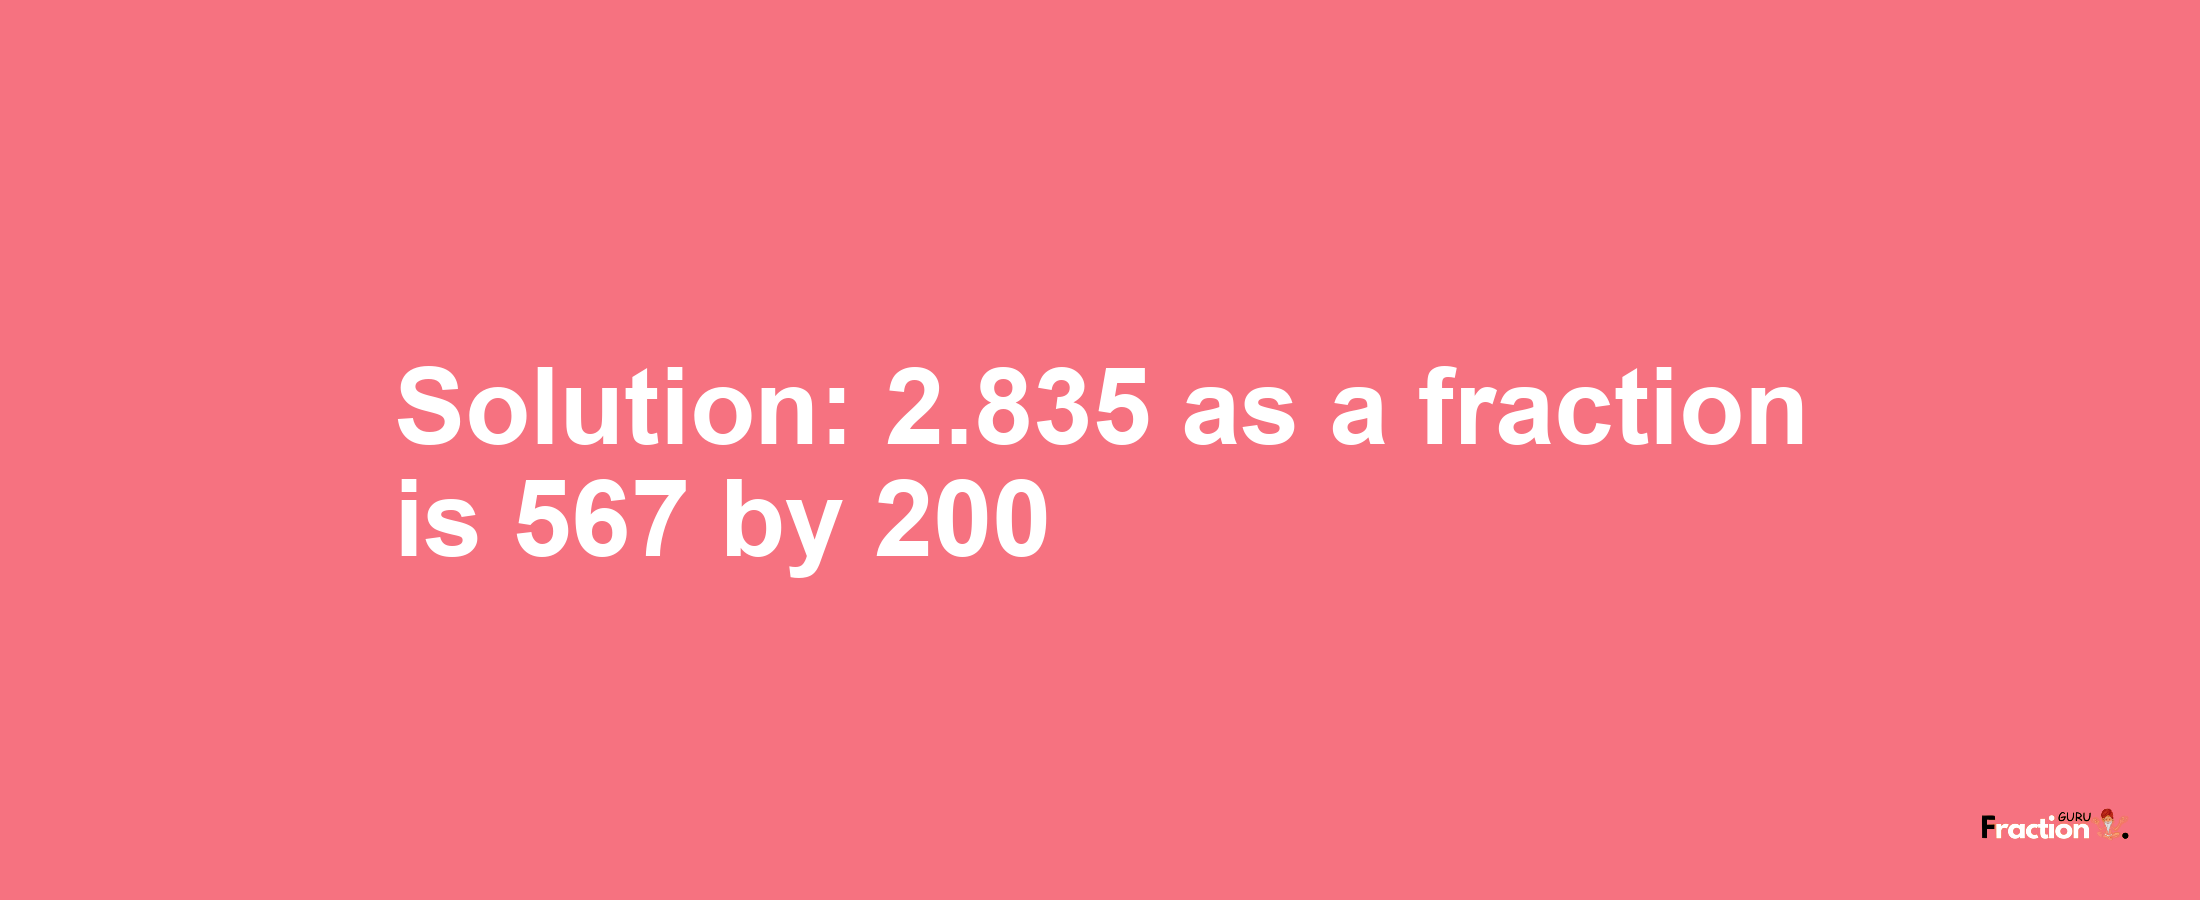 Solution:2.835 as a fraction is 567/200